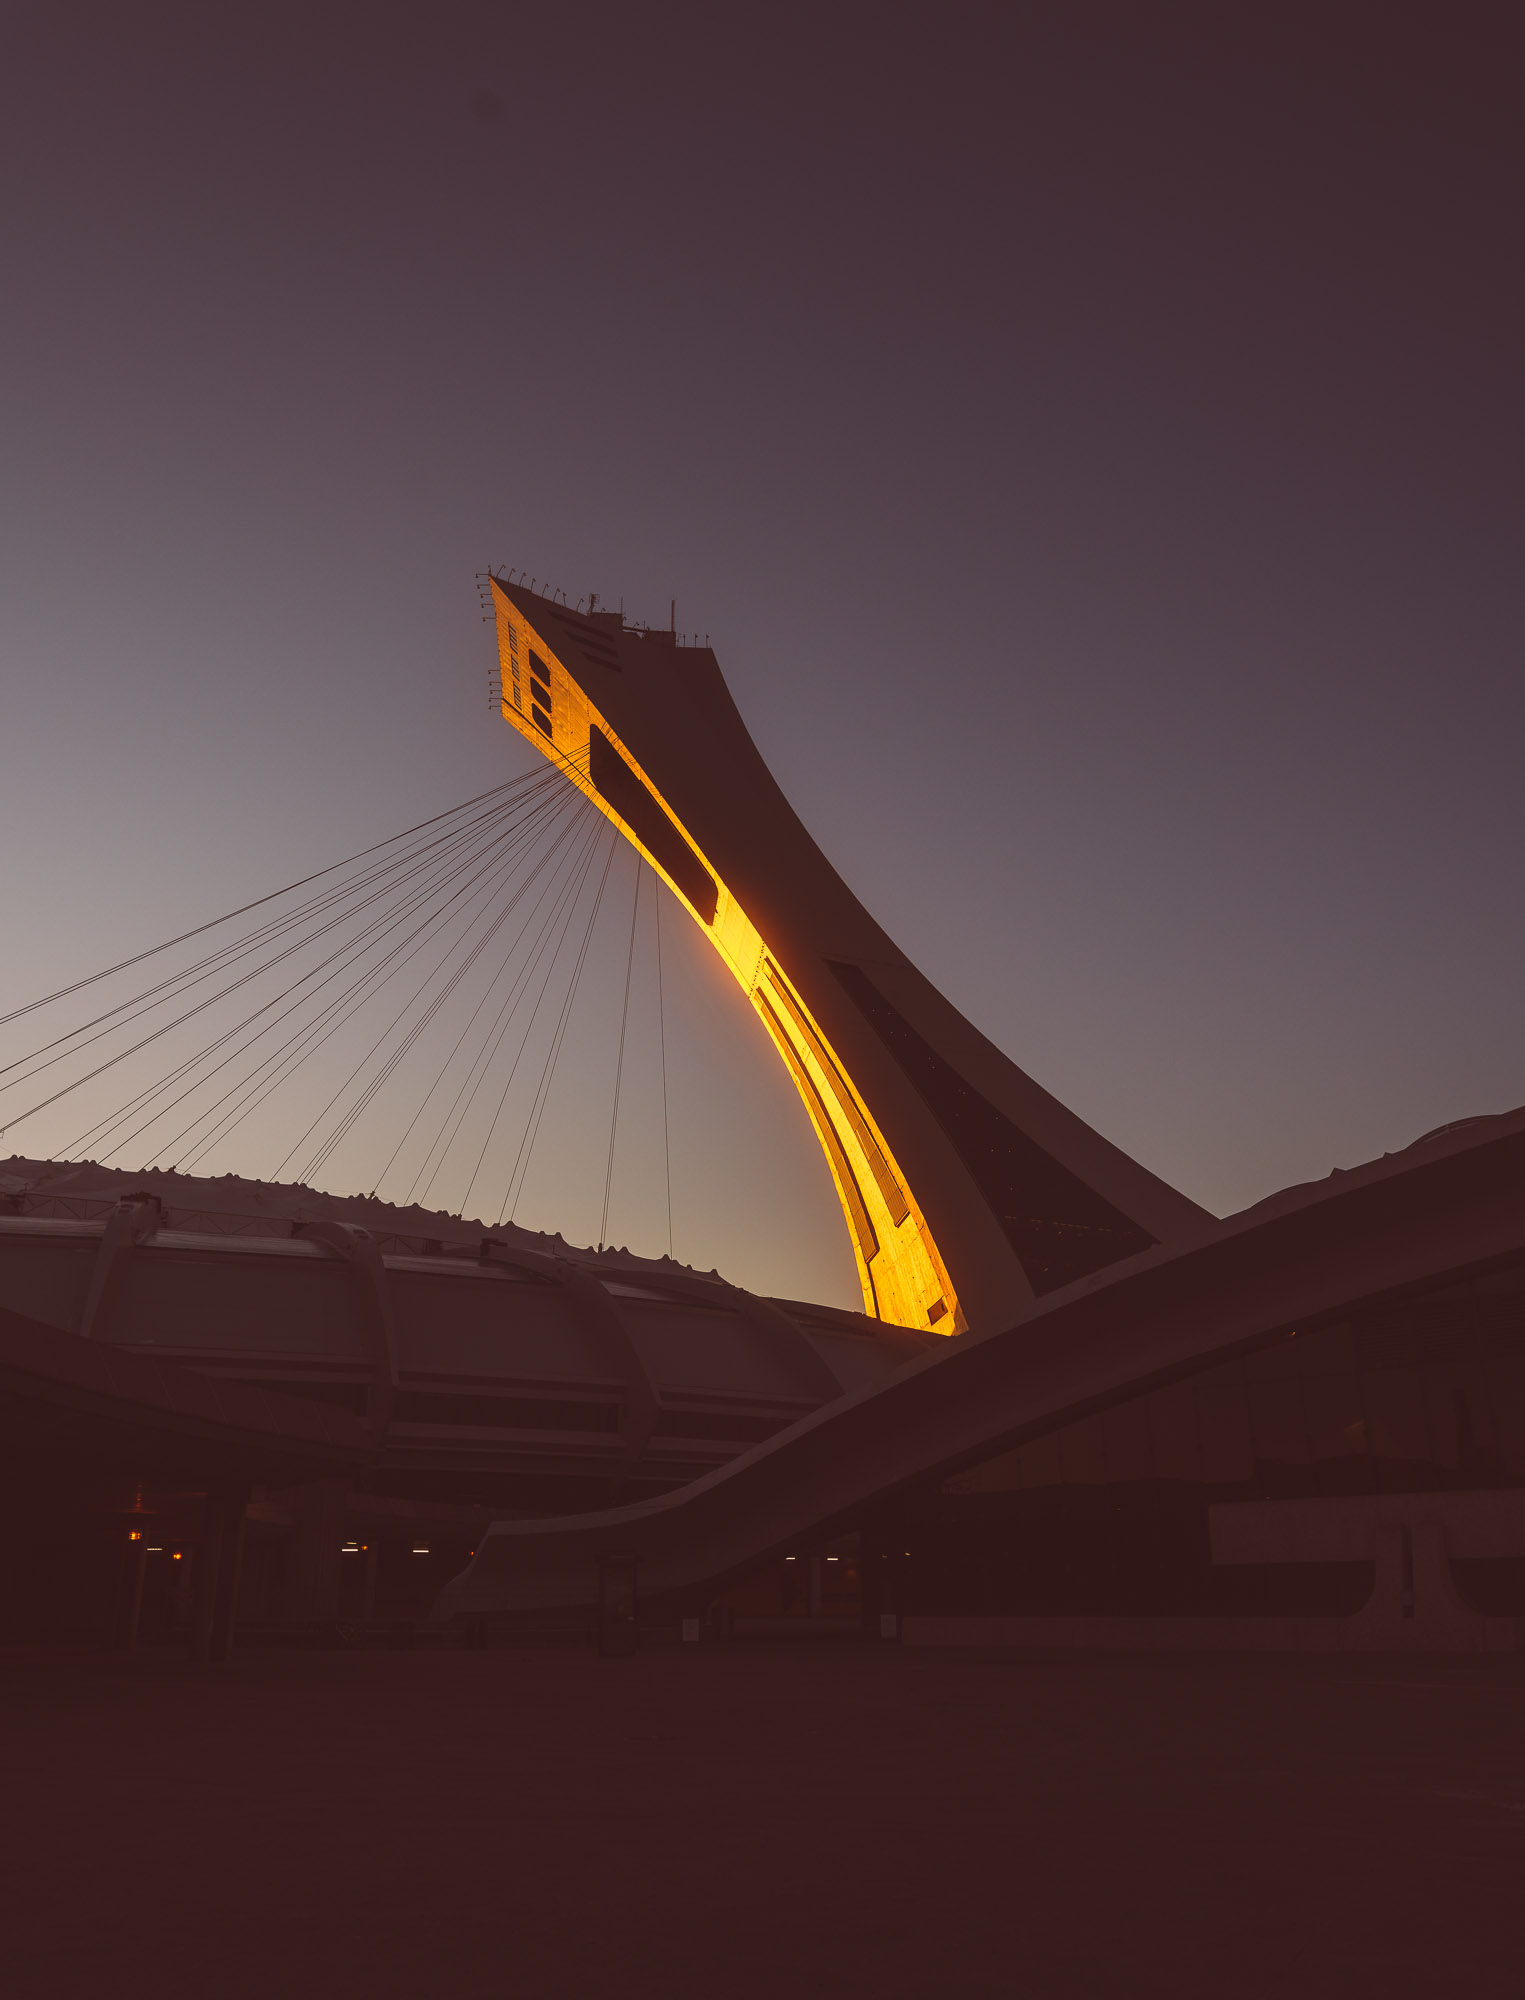 Stade Olympique Montreal Olympic Stadium - Jeff Frenette Photography - Montreal Travel Lifestyle Photographer - All photos are under Copyright  © 2021 Jeff Frenette Photography / dezjeff. To use the photos, please contact me at dezjeff@me.com.